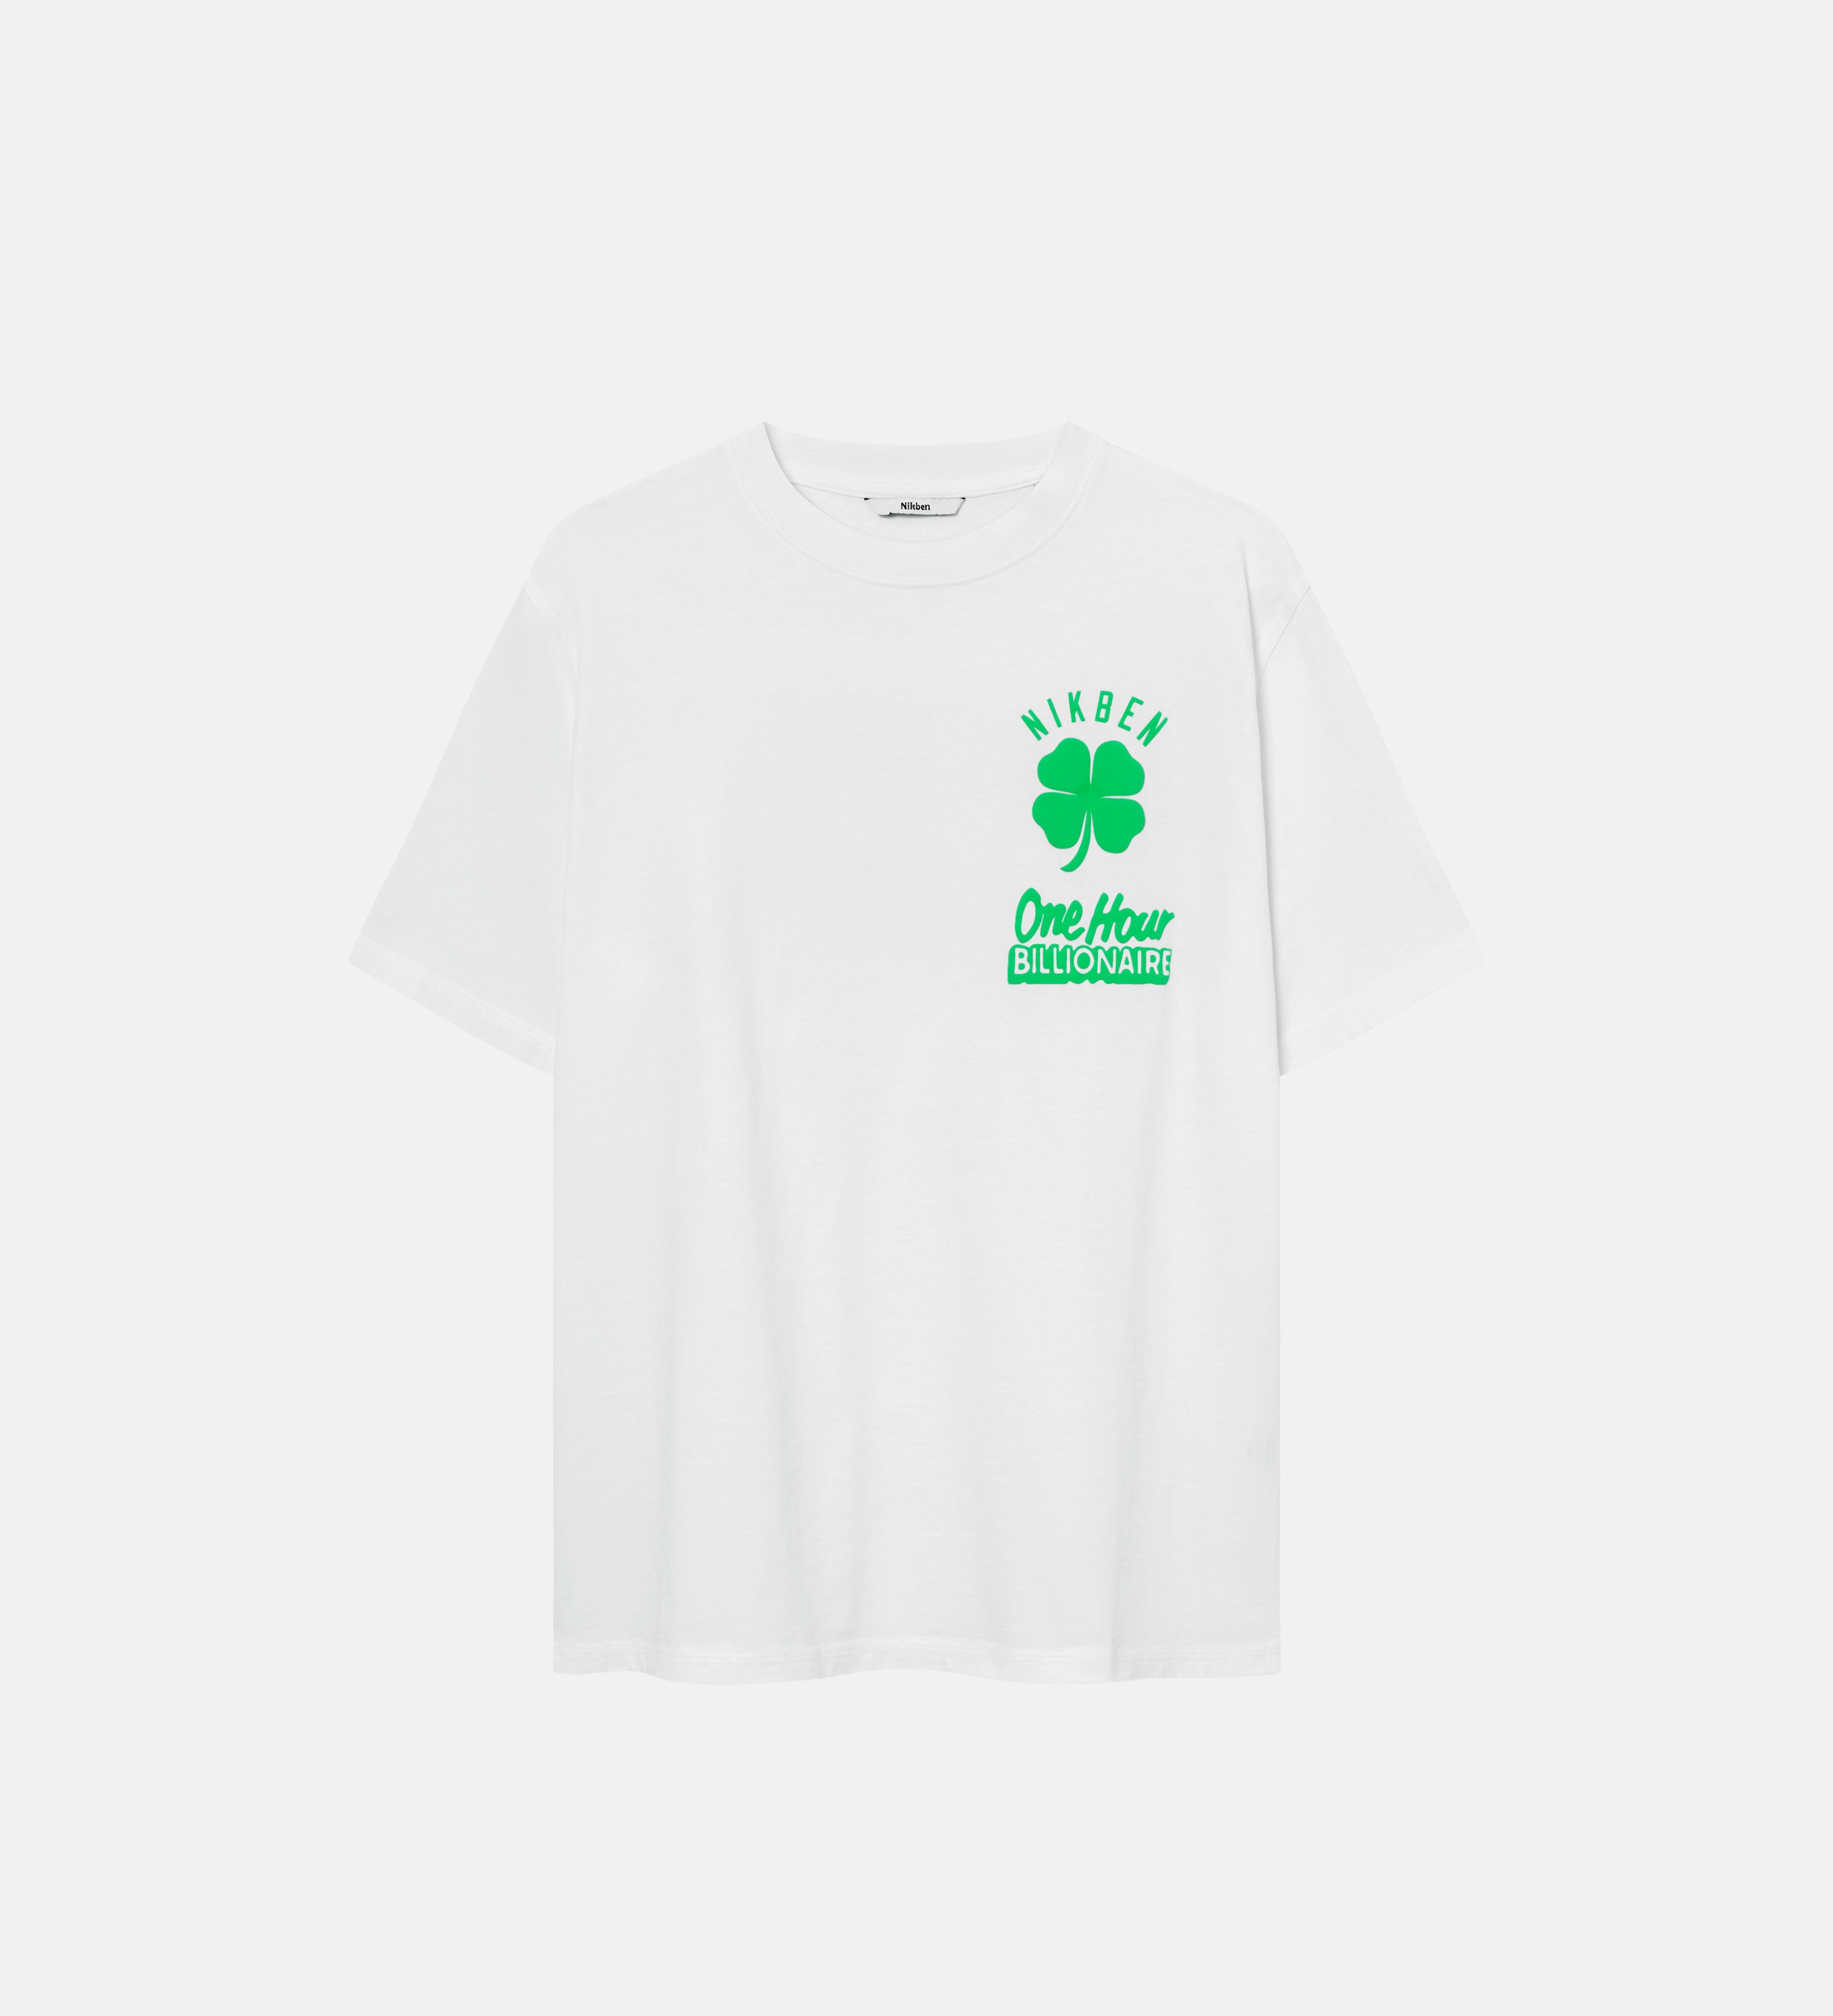 White t-shirt with a green clover print and the text "One Hour Billionaire"